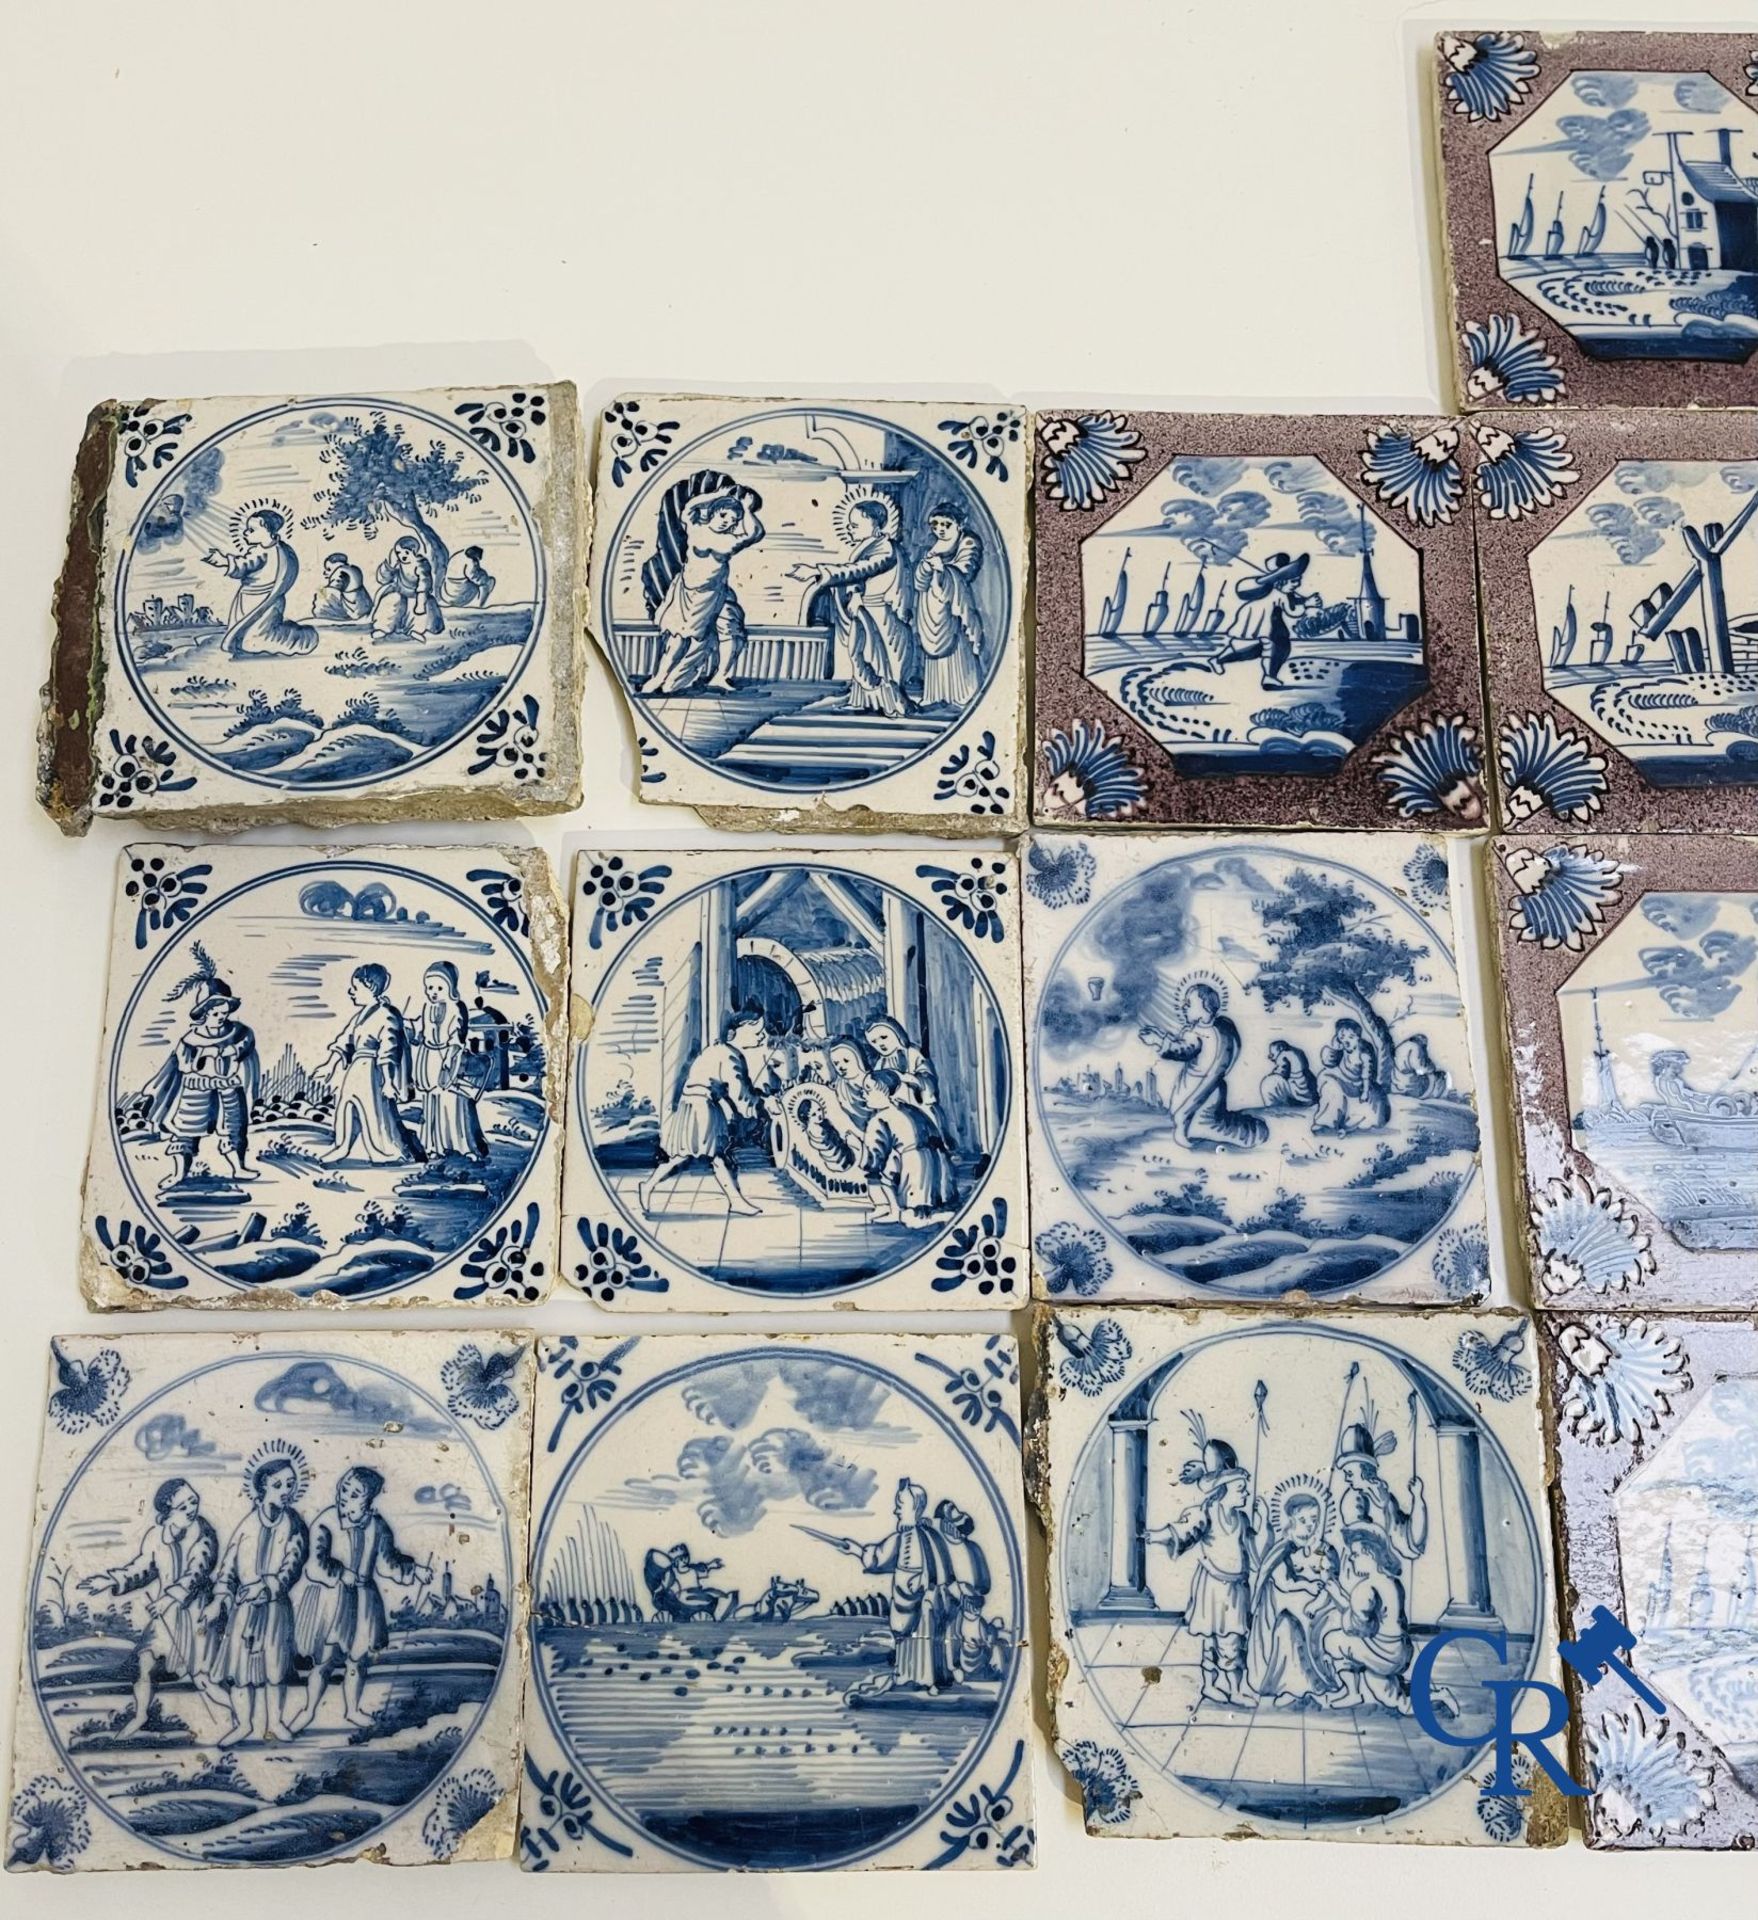 A large collection of various Delft tiles. 17th-18th century. - Image 4 of 23